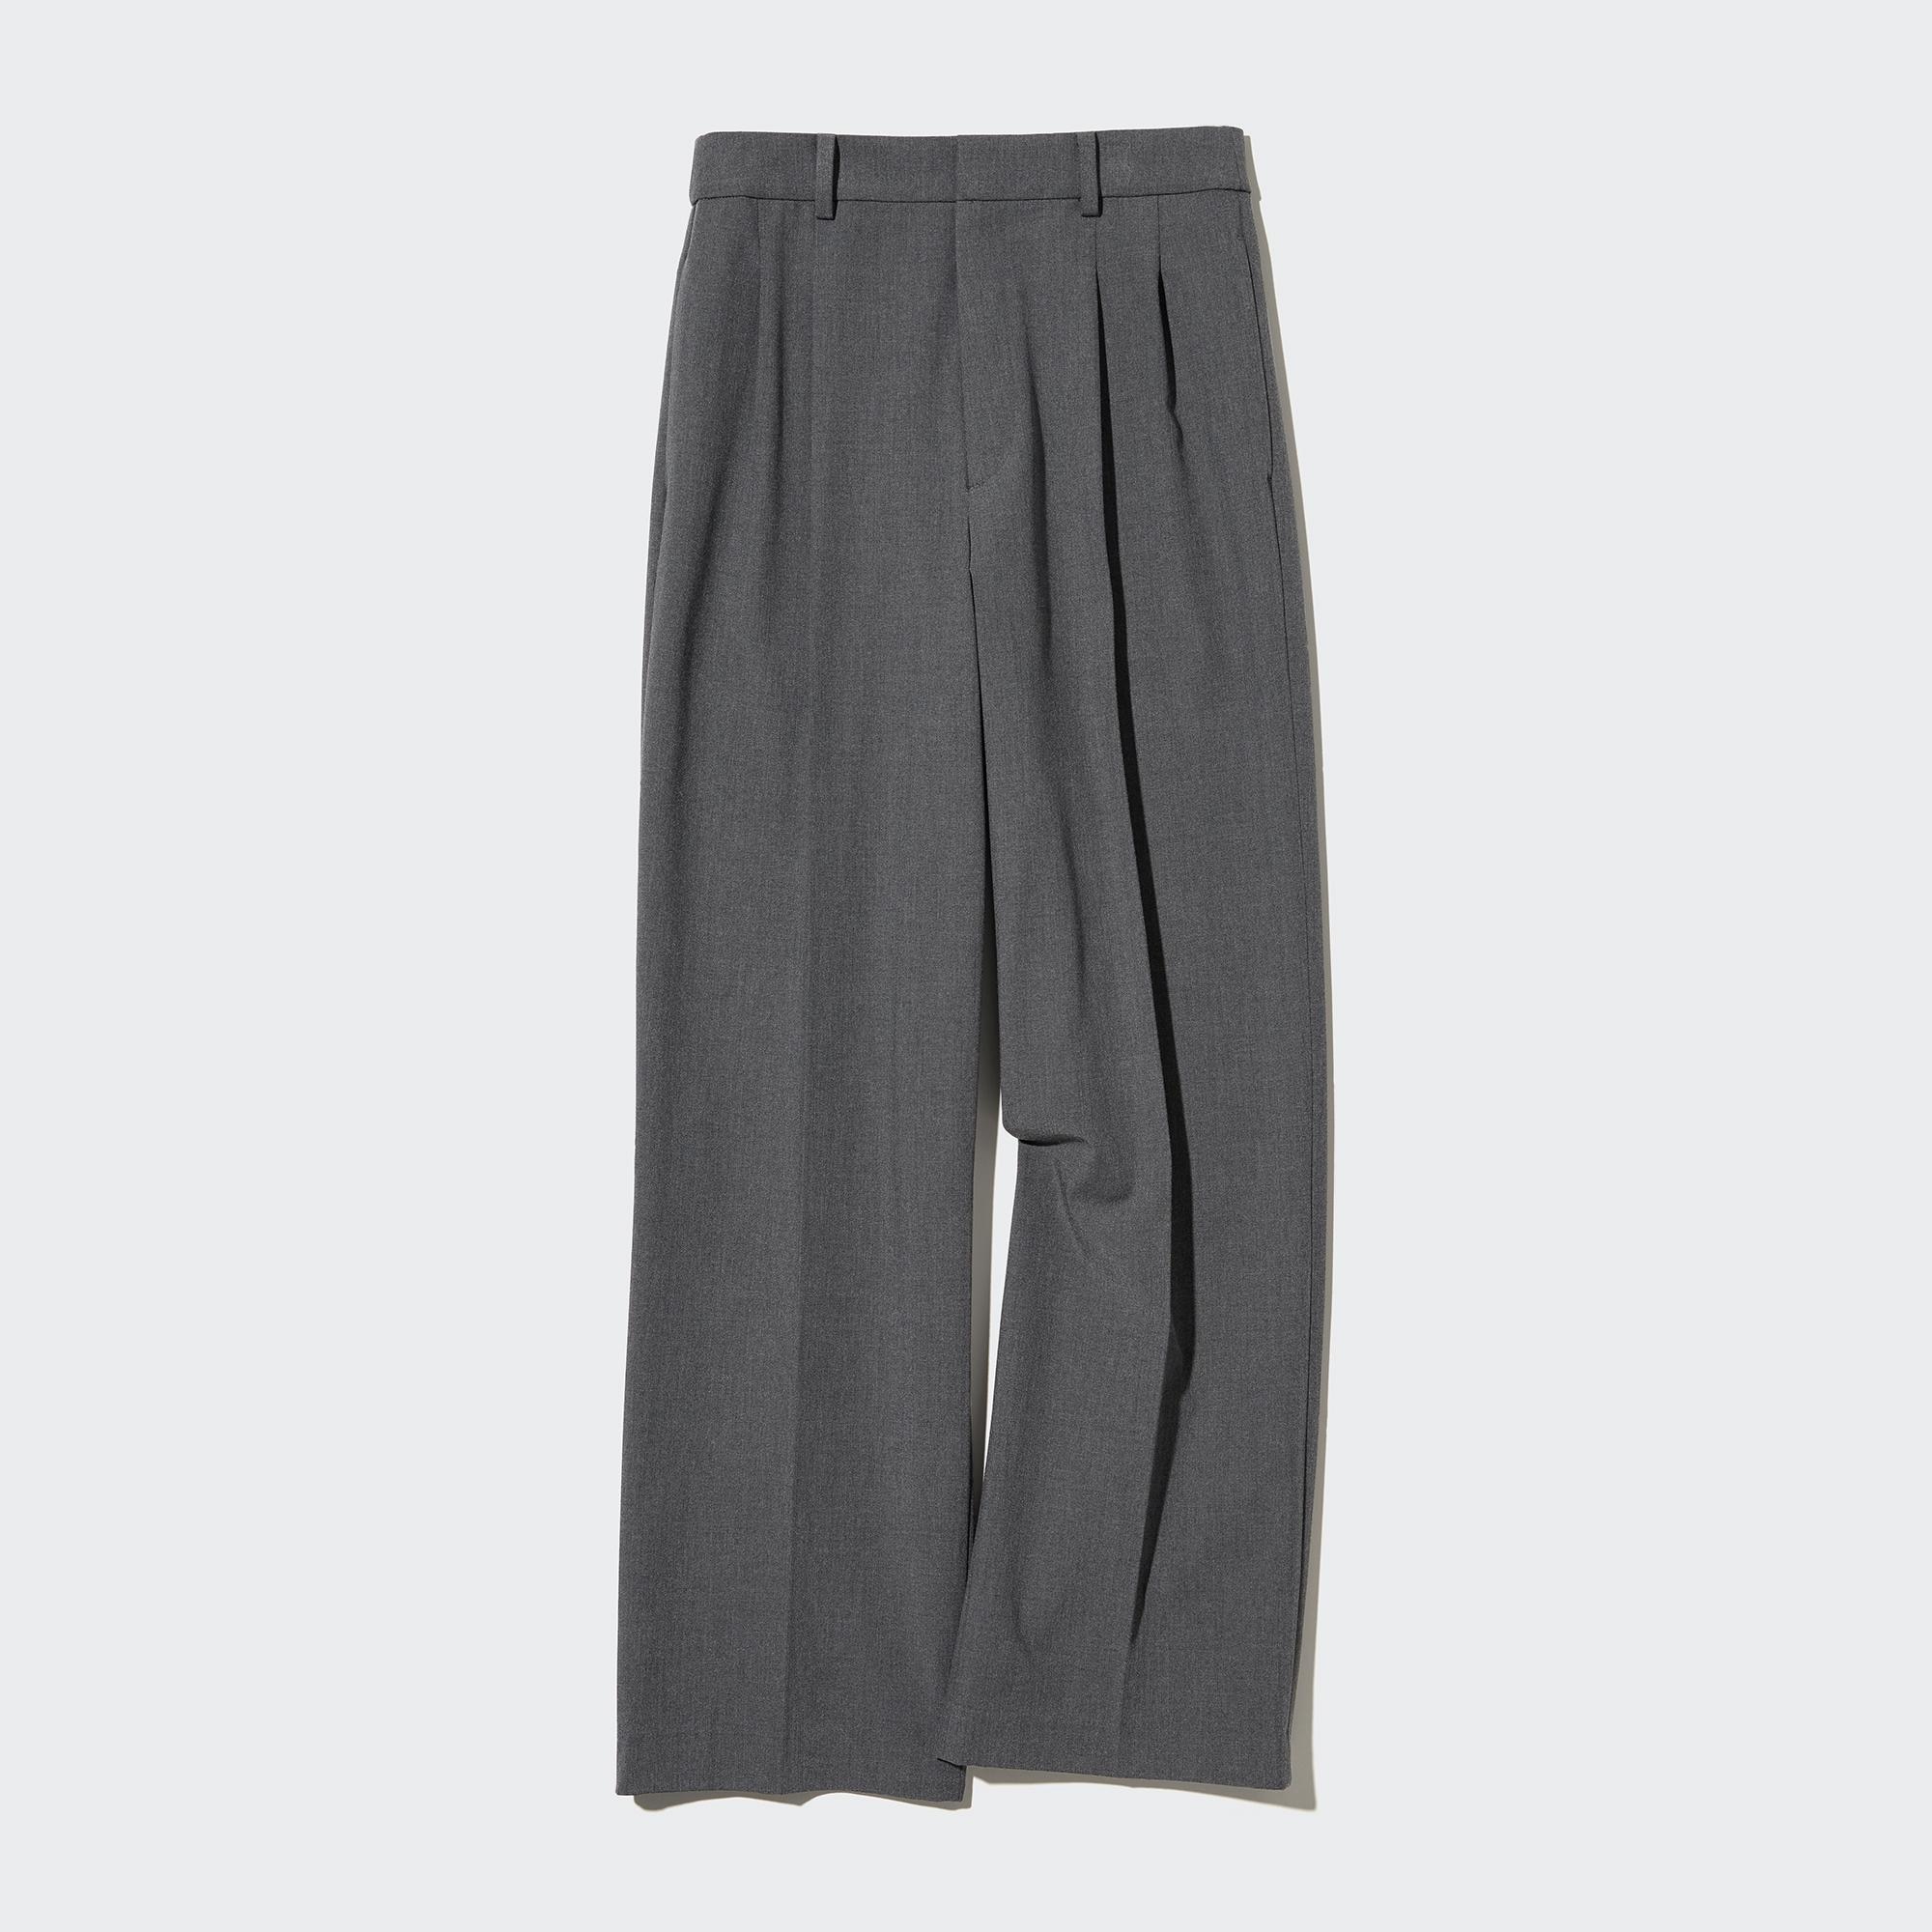 Uniqlo Cotton Relaxed Ankle Pants Women | Lazada PH